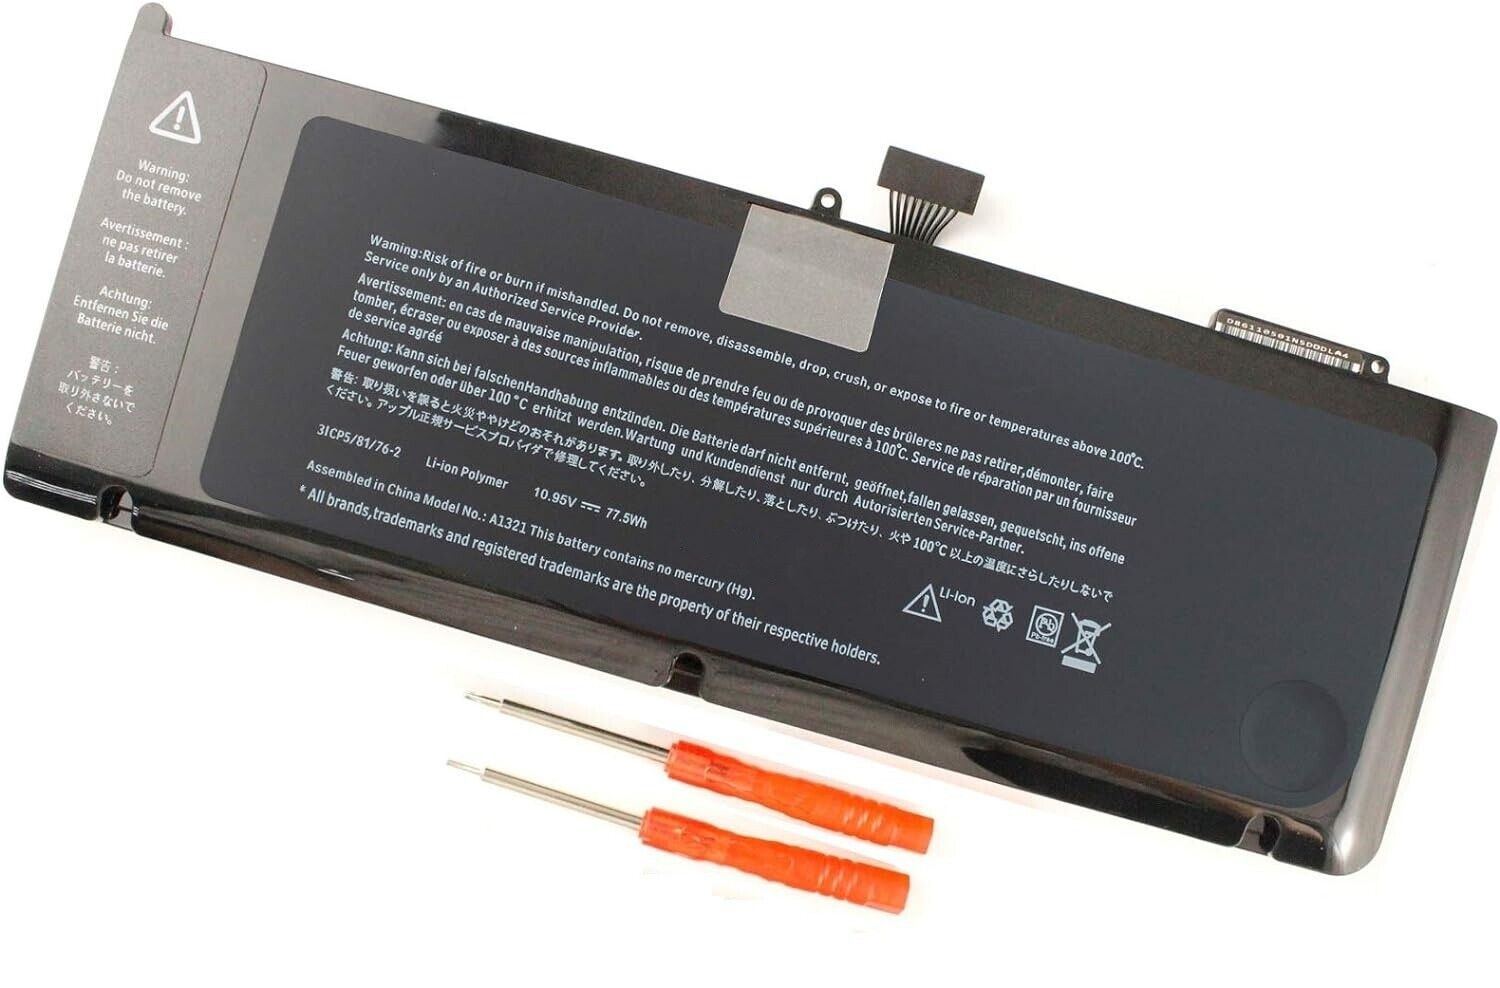 A1321 Laptop Battery for MacBook Pro 15 Inch Mid 2009 Mid 2010, Replacement